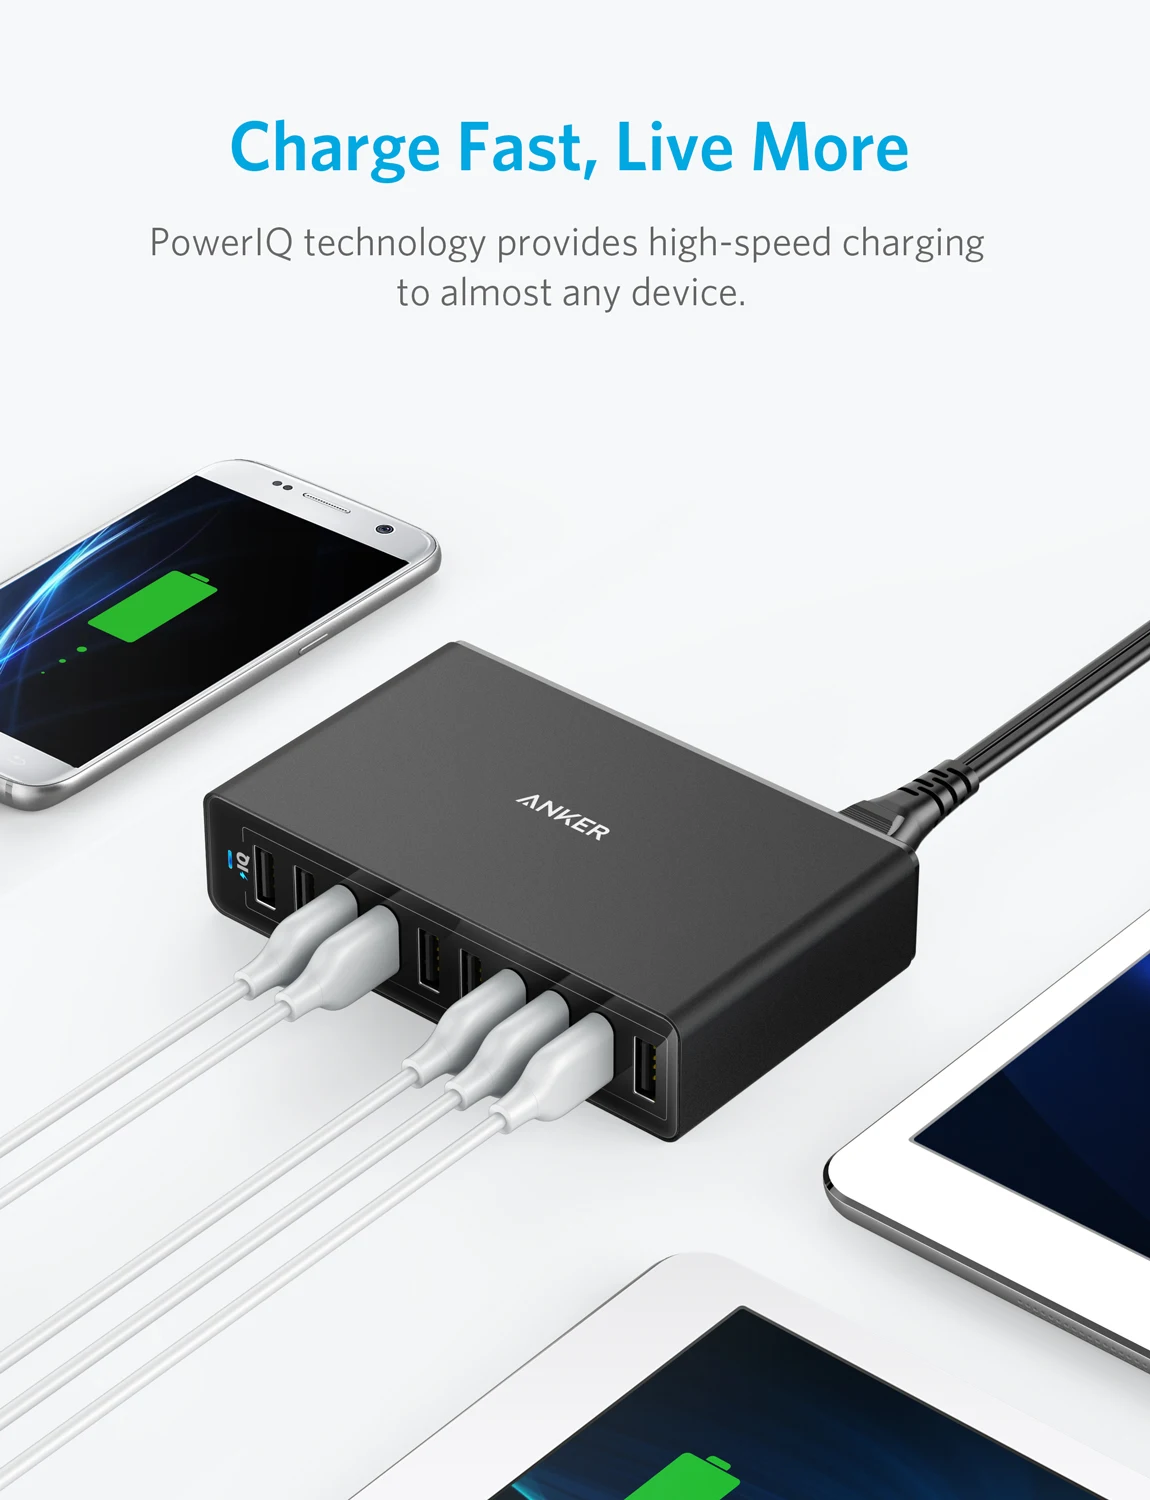 anker 60w 10 port usb wall charger powerport10 for iphone xsxs maxxrx ipad proair 2mini galaxy s7s6edgeplus note 5 more free global shipping